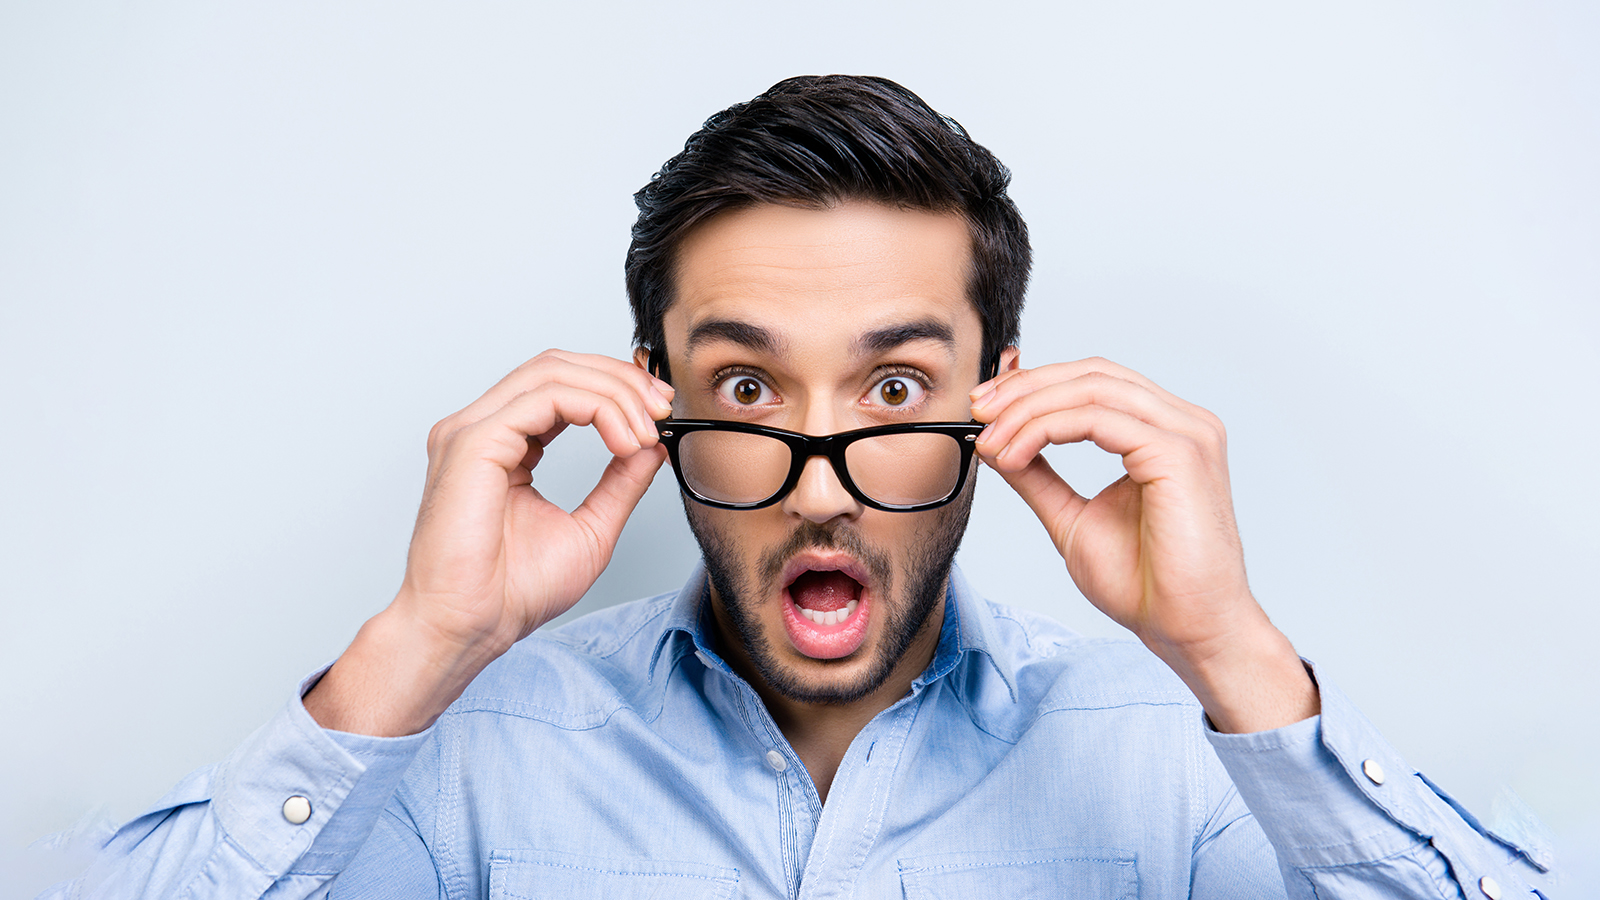 OMG! WTF! Head shot of shocke funny guy with black hair wide open mouth big-eyed looking out glasses on face isolated on grey background